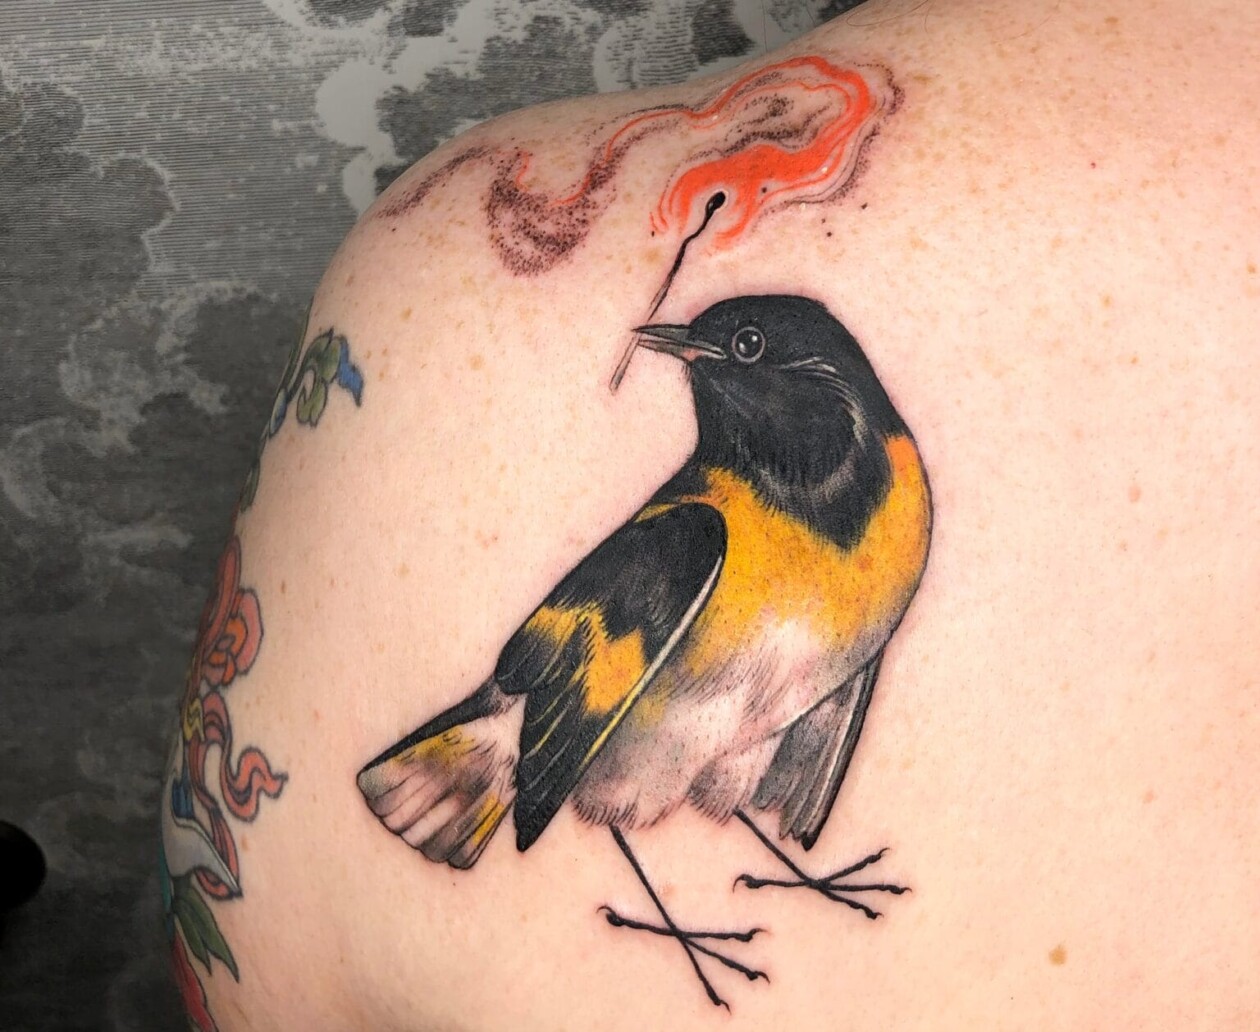 Stephanie Brown Creates Whimsical Tattoos Of Birds Holding A Lit Match Symbolizing Hope For A Better Future (4)